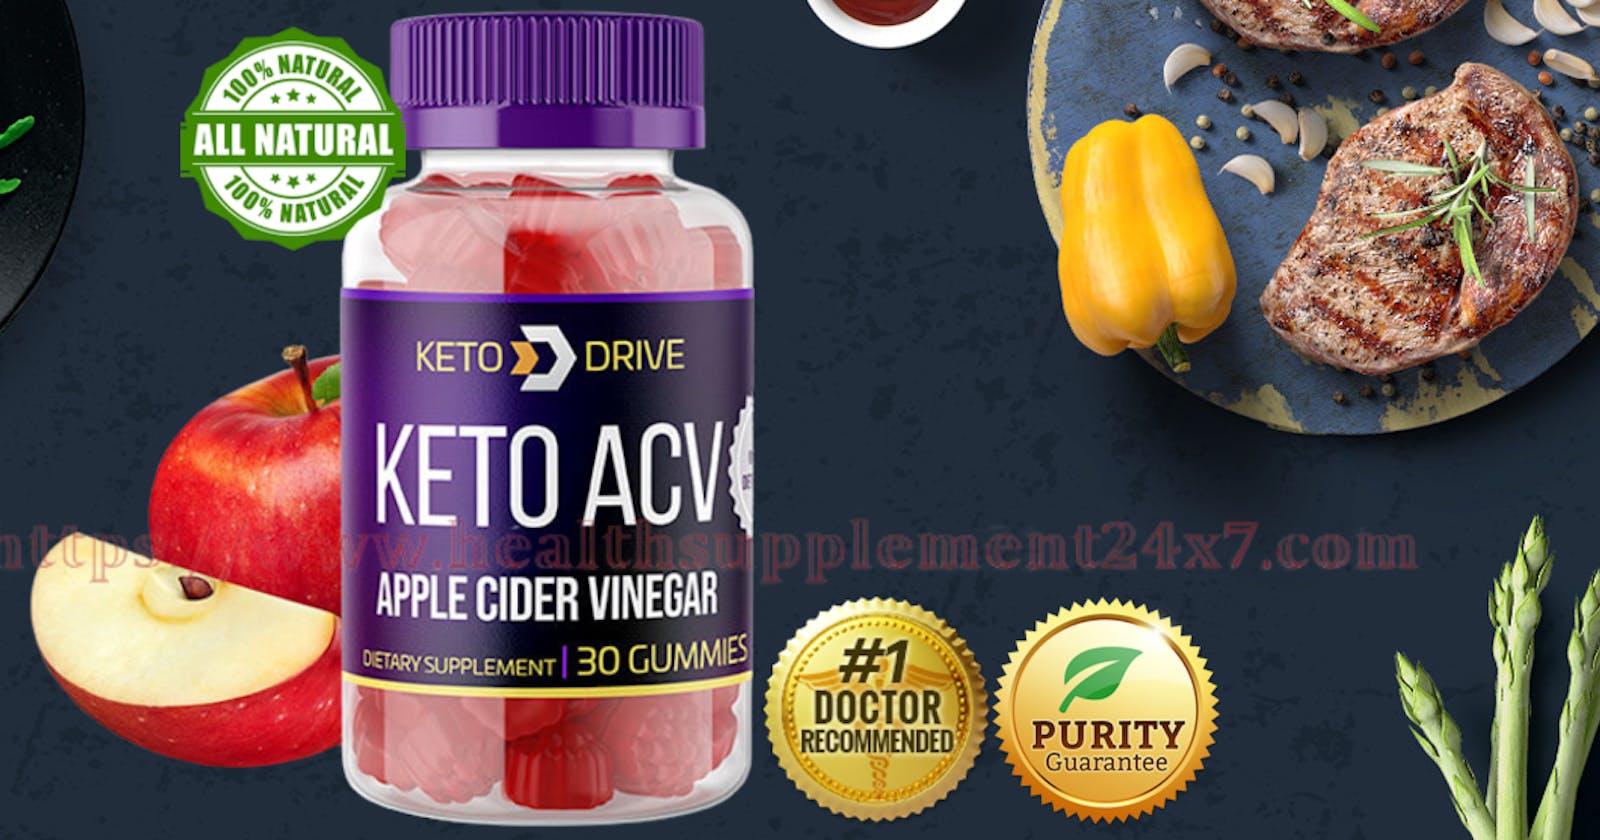 Keto Drive ACV Gummies {USA + Canada} Fat And Weight Loss Effective Way To Control OverWeight Management(Work Or Hoax)